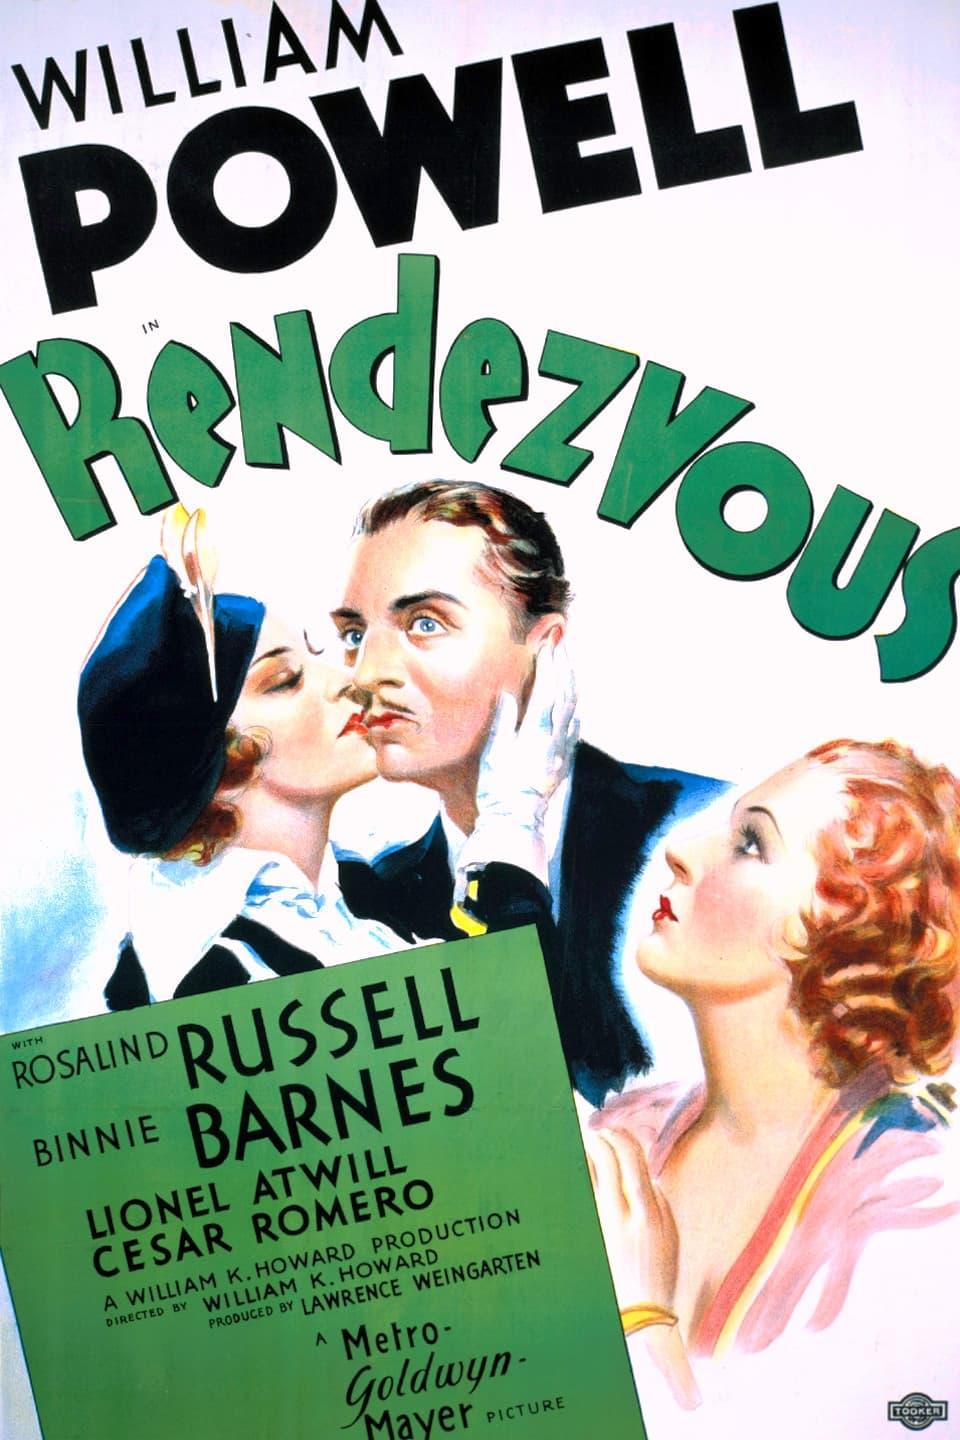 Rendezvous poster